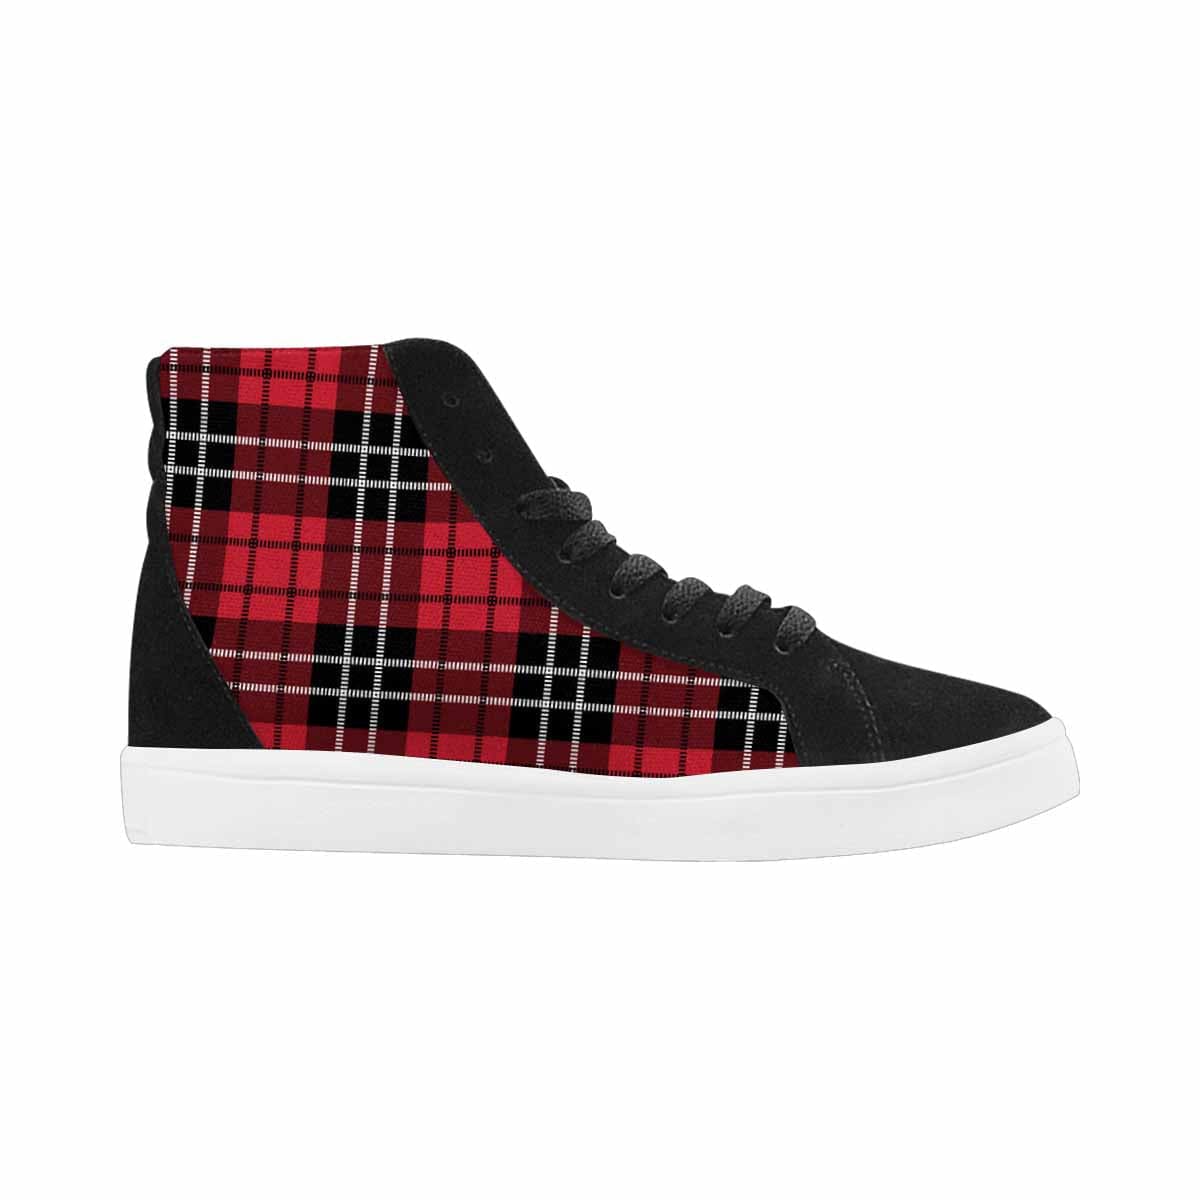 Sneakers For Women, Buffalo Plaid Red And Black - High Top Sports Shoes-0